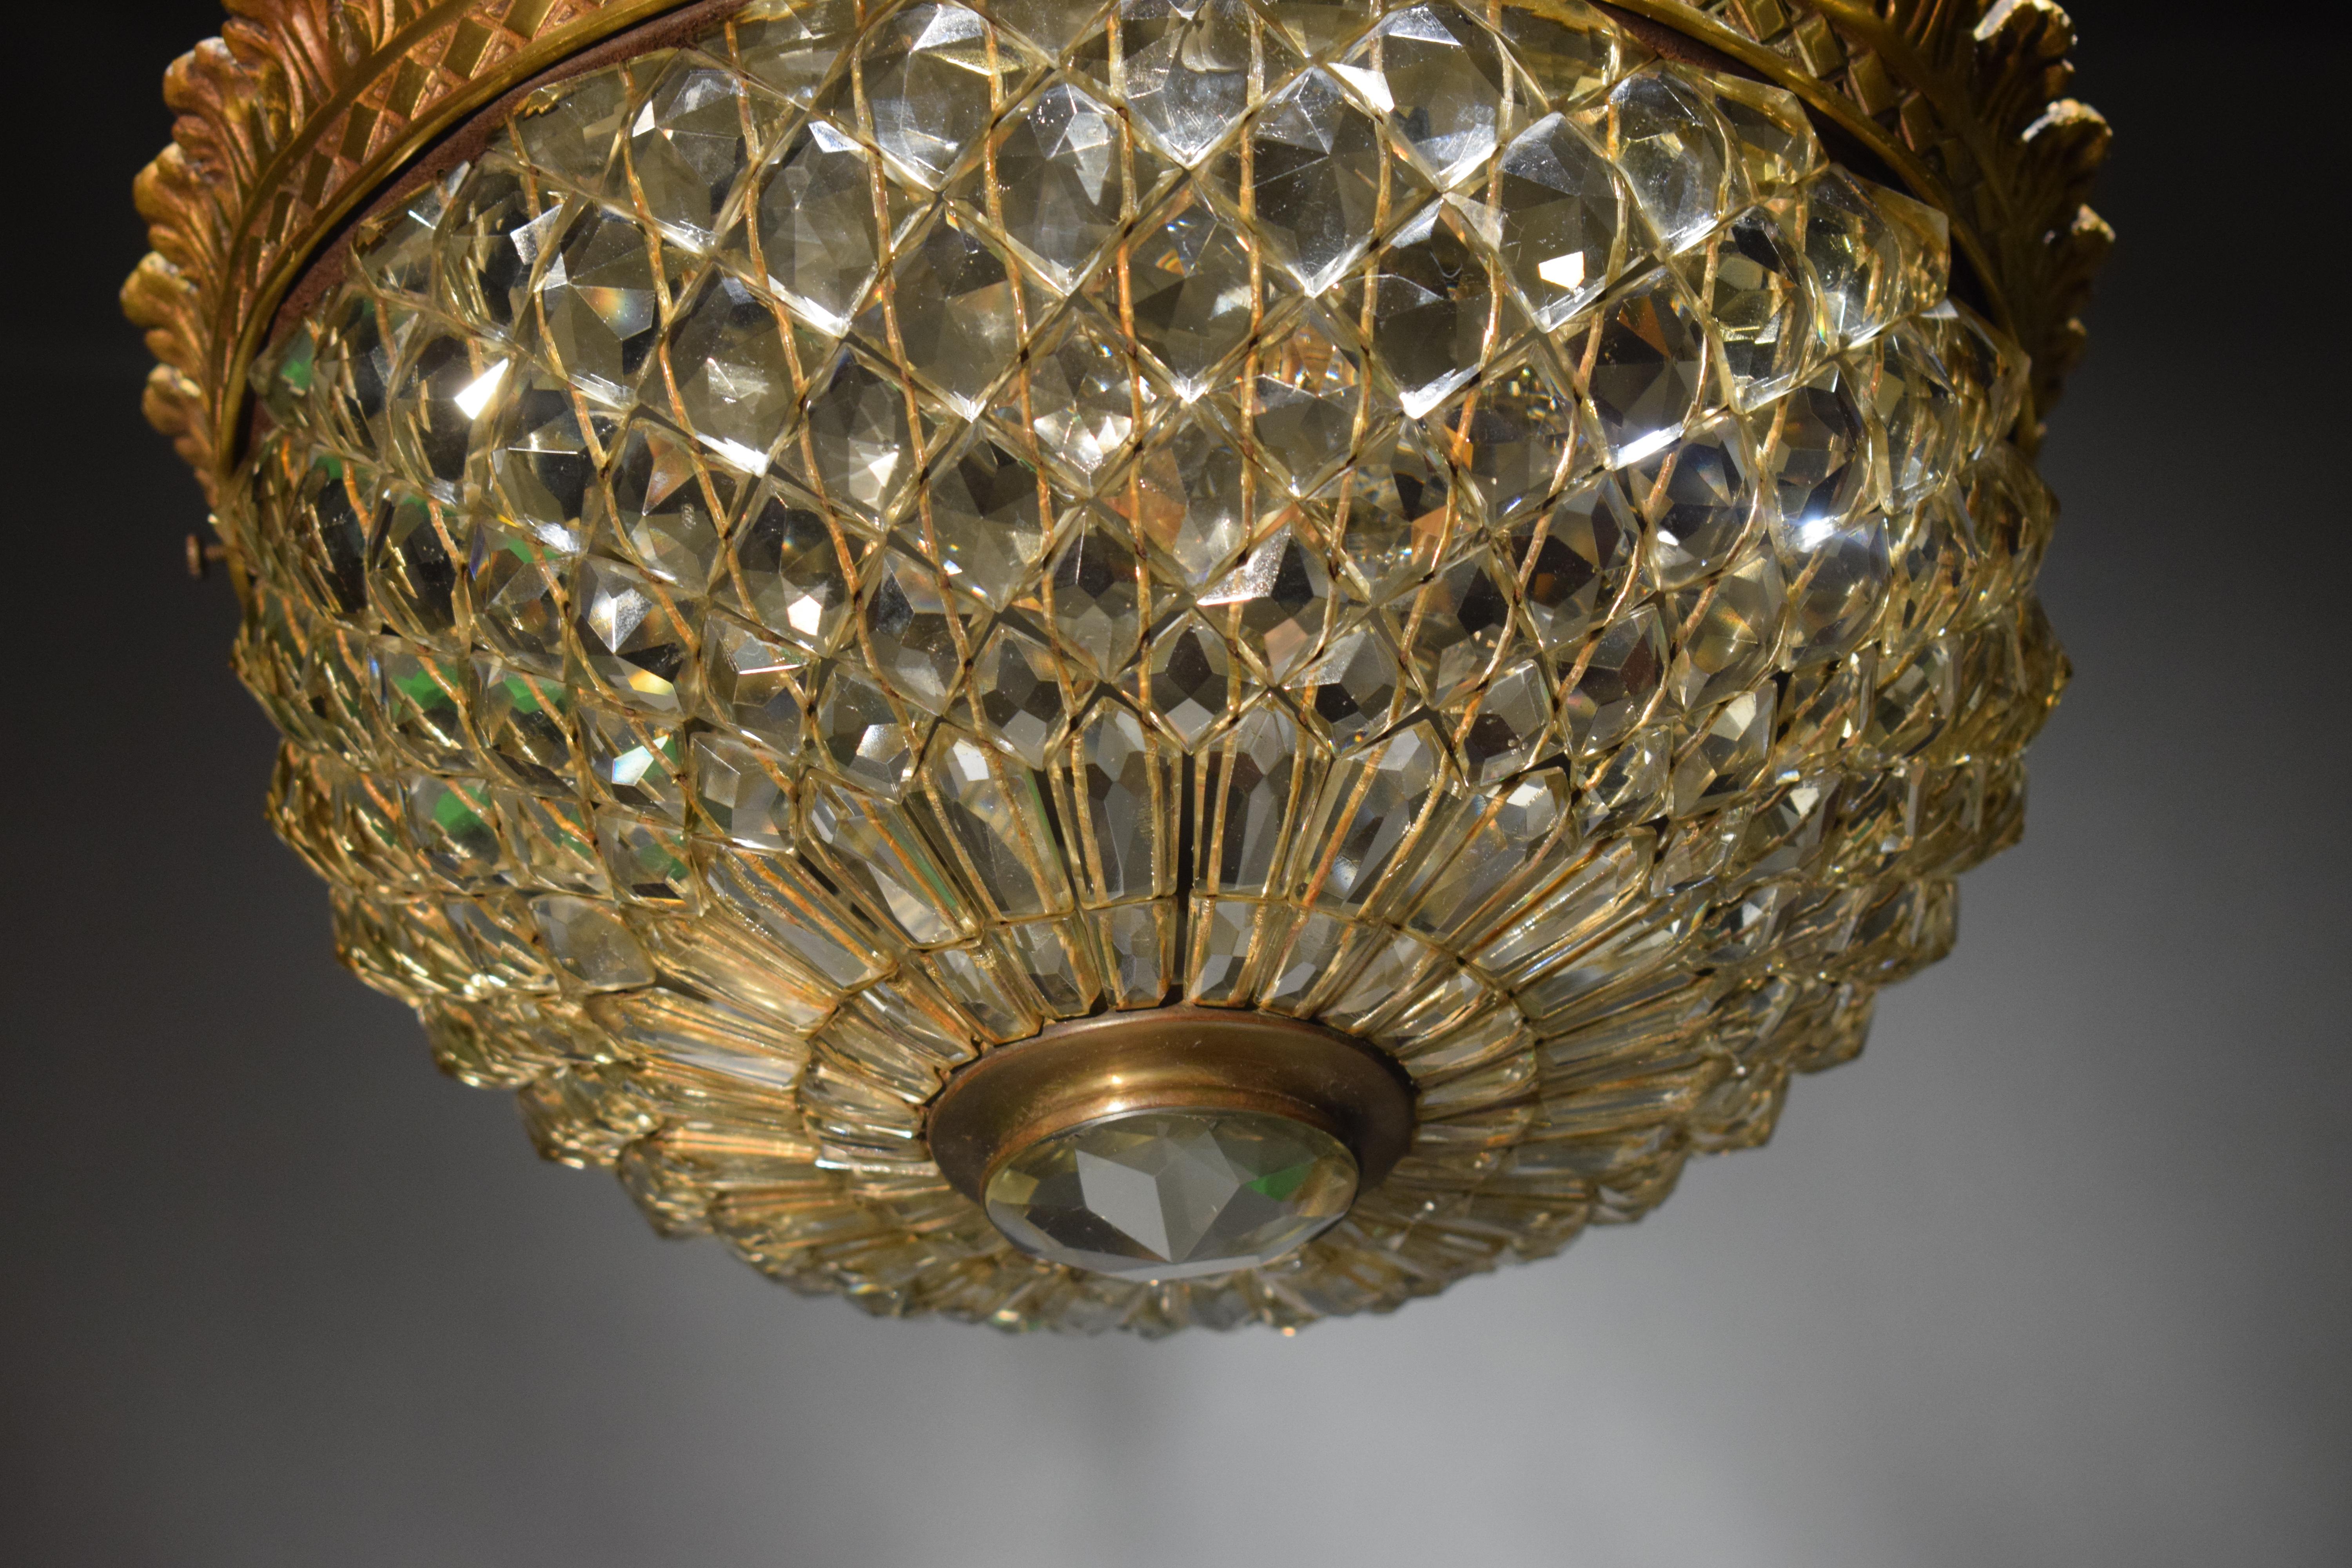 A fine and elegant gilt bronze pendant, handcut baguettes and hexagon beads conform the dome, France, circa 1910,
2-light.
Dimensions: Height 7 1/2